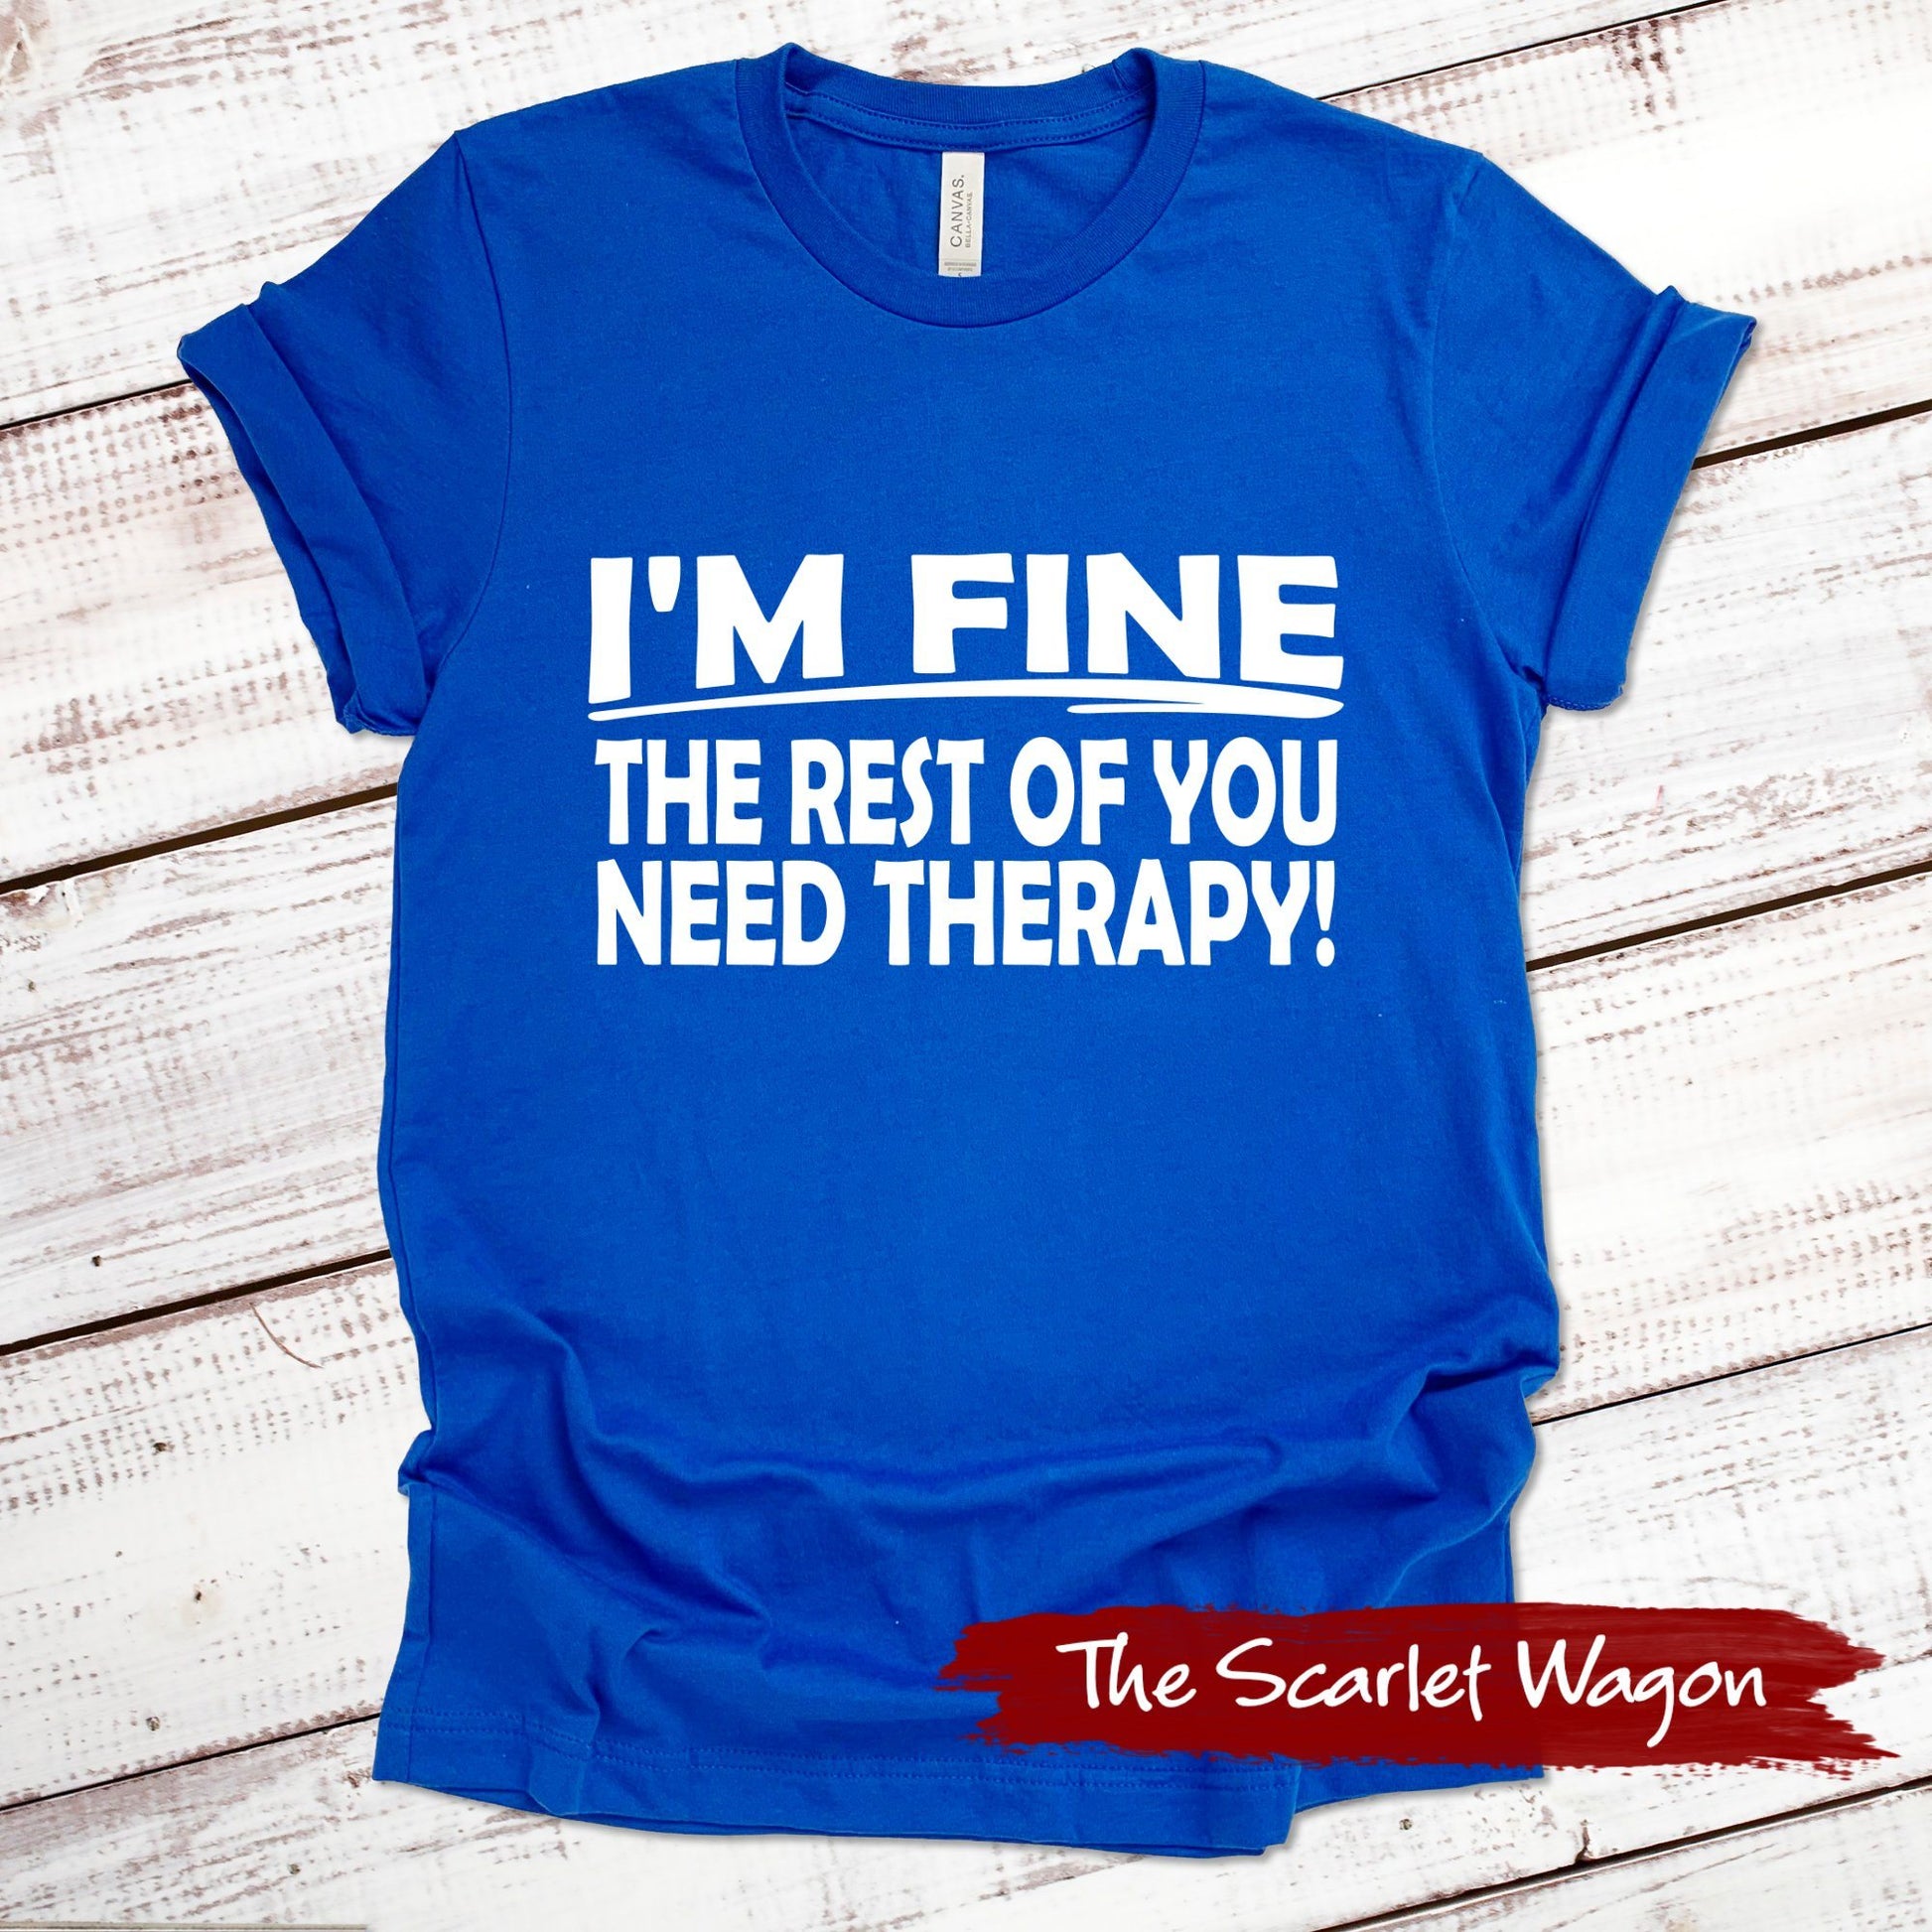 I'm Fine the Rest of You Need Therapy Funny Shirt Scarlet Wagon True Royal XS 